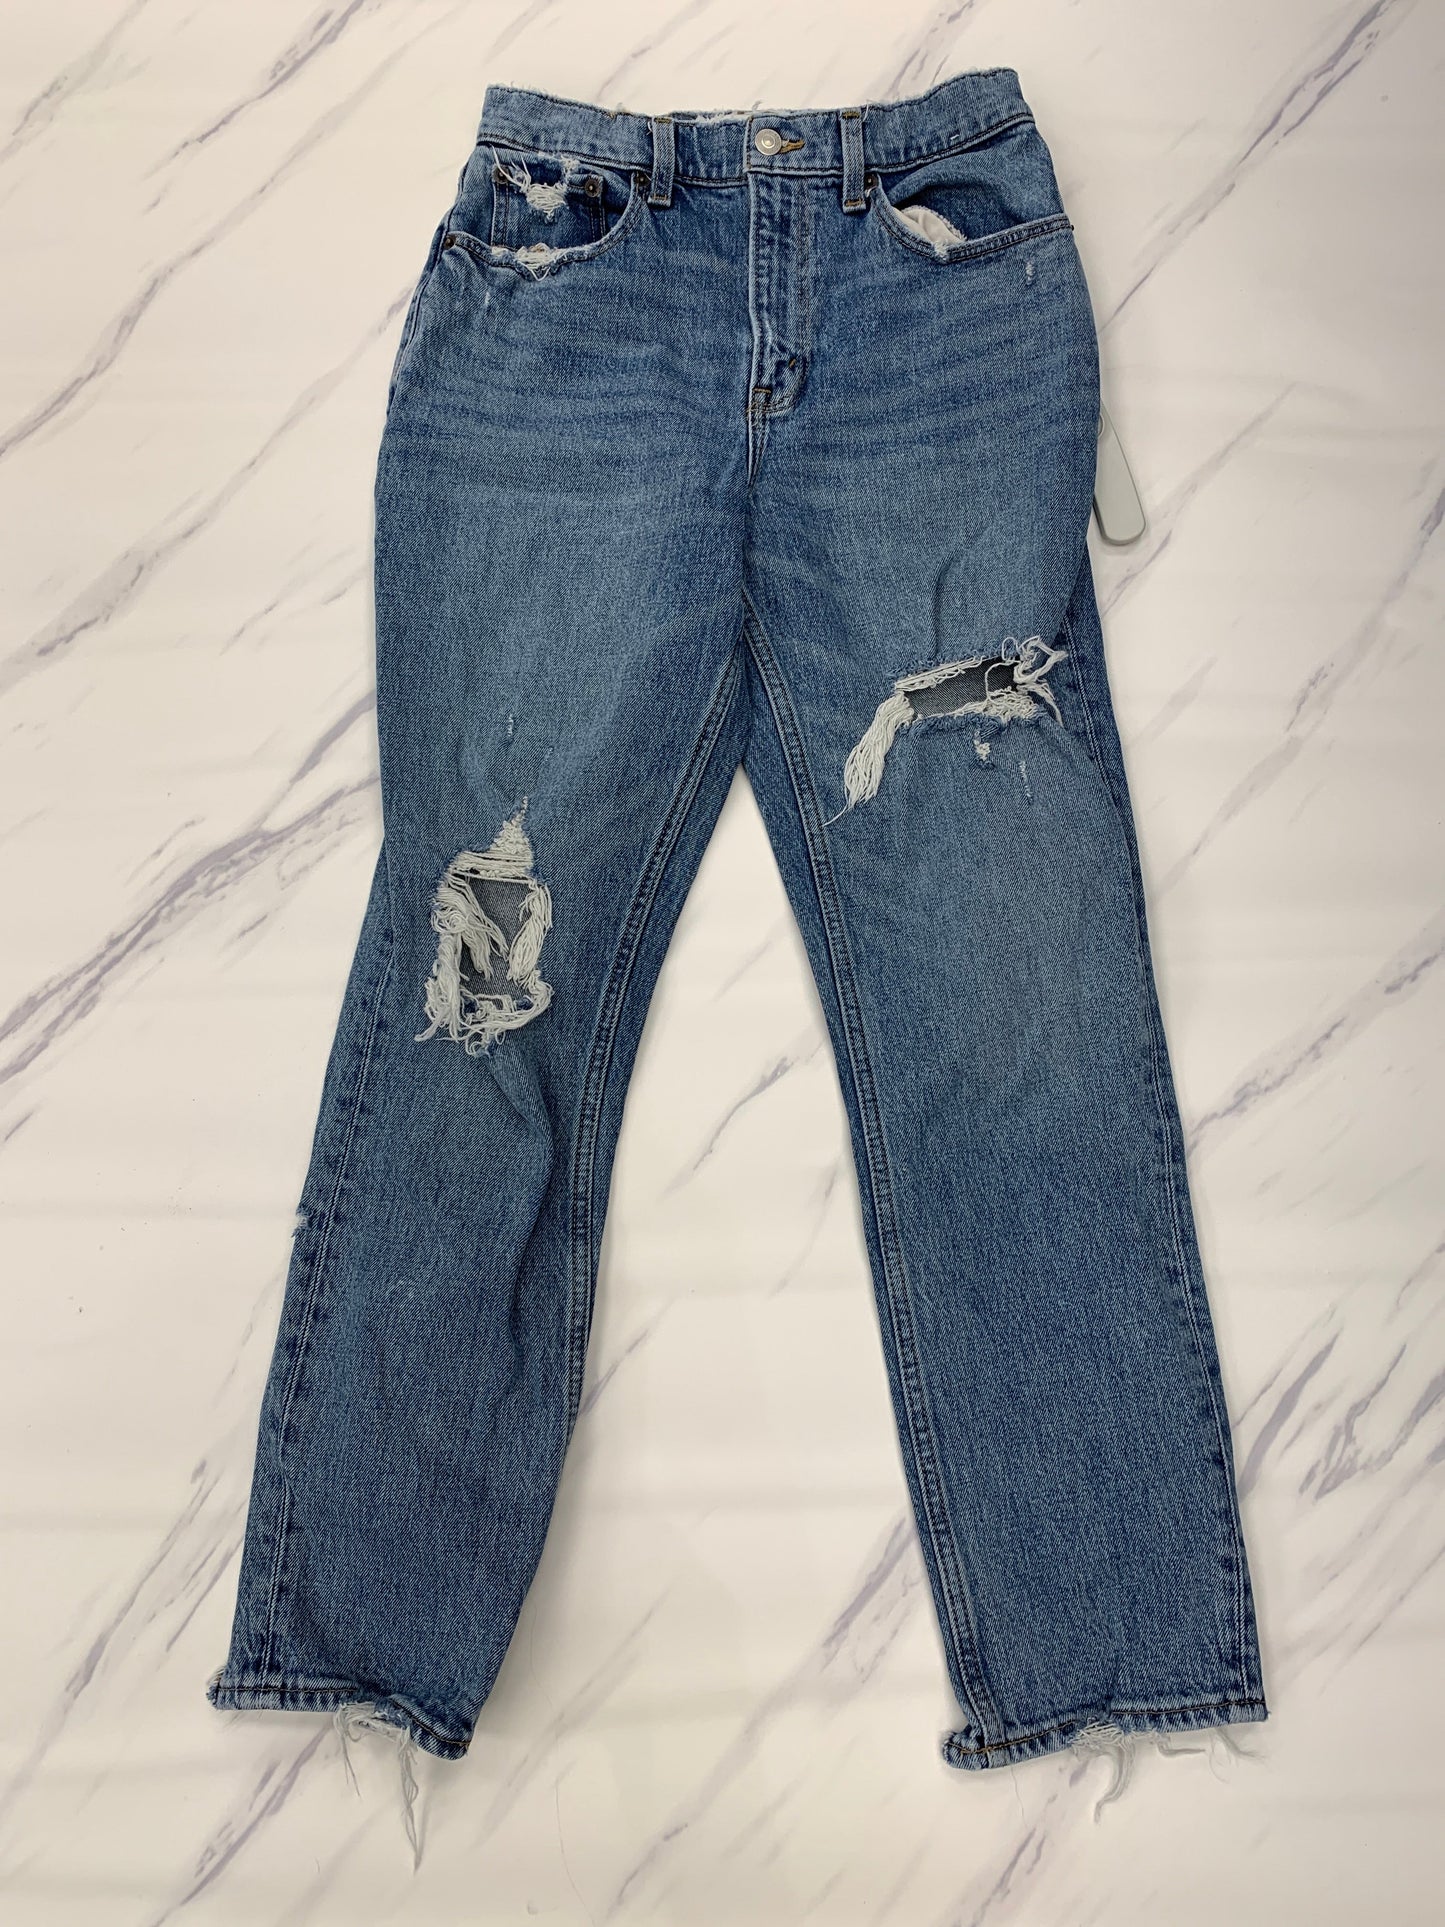 Jeans Straight Abercrombie And Fitch, Size 2